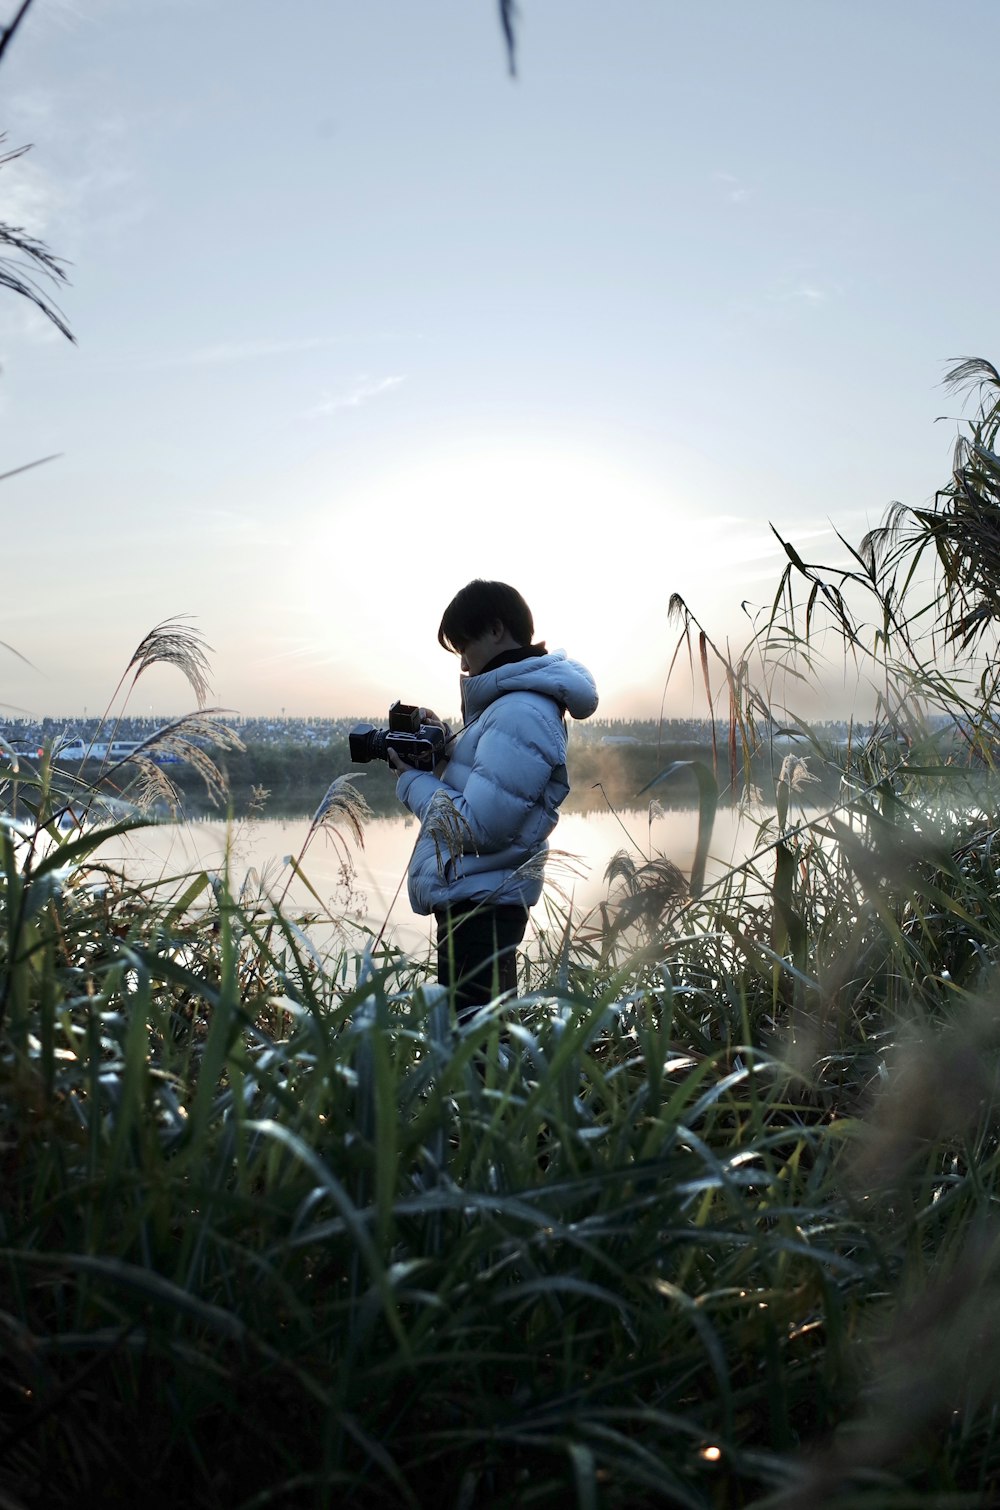 man in blue jacket and black pants holding black dslr camera standing on green grass field